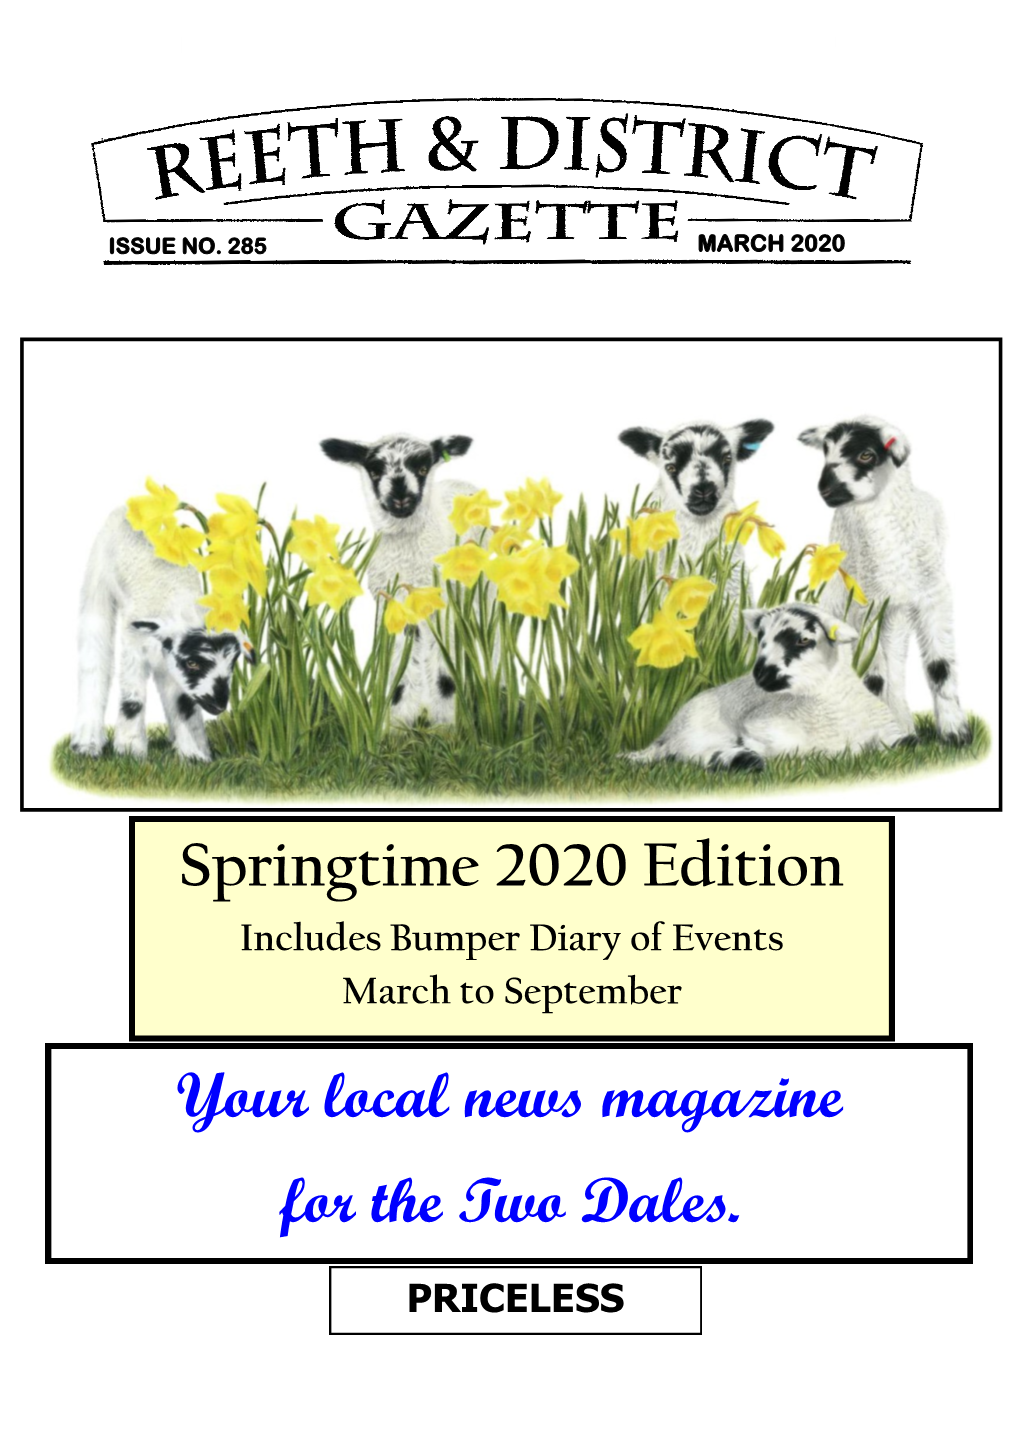 Your Local News Magazine for the Two Dales. Springtime 2020 Edition